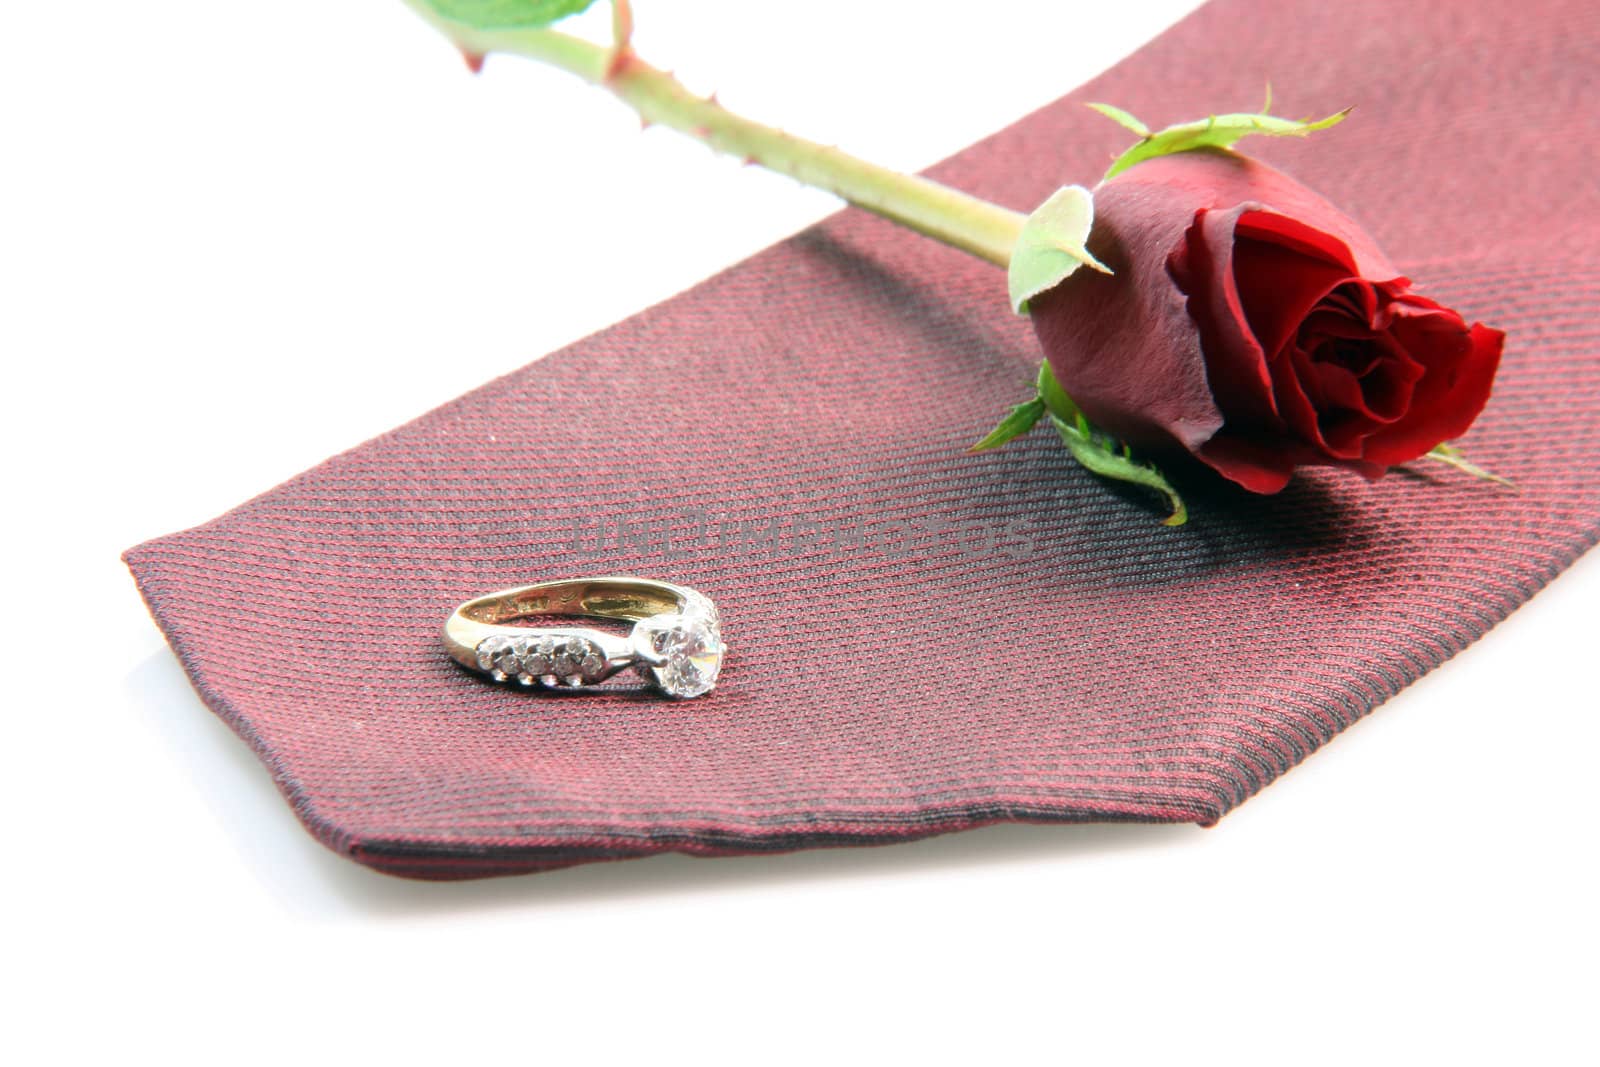 wedding proposal equipment diomond ring, red silk tie and red rose on white background